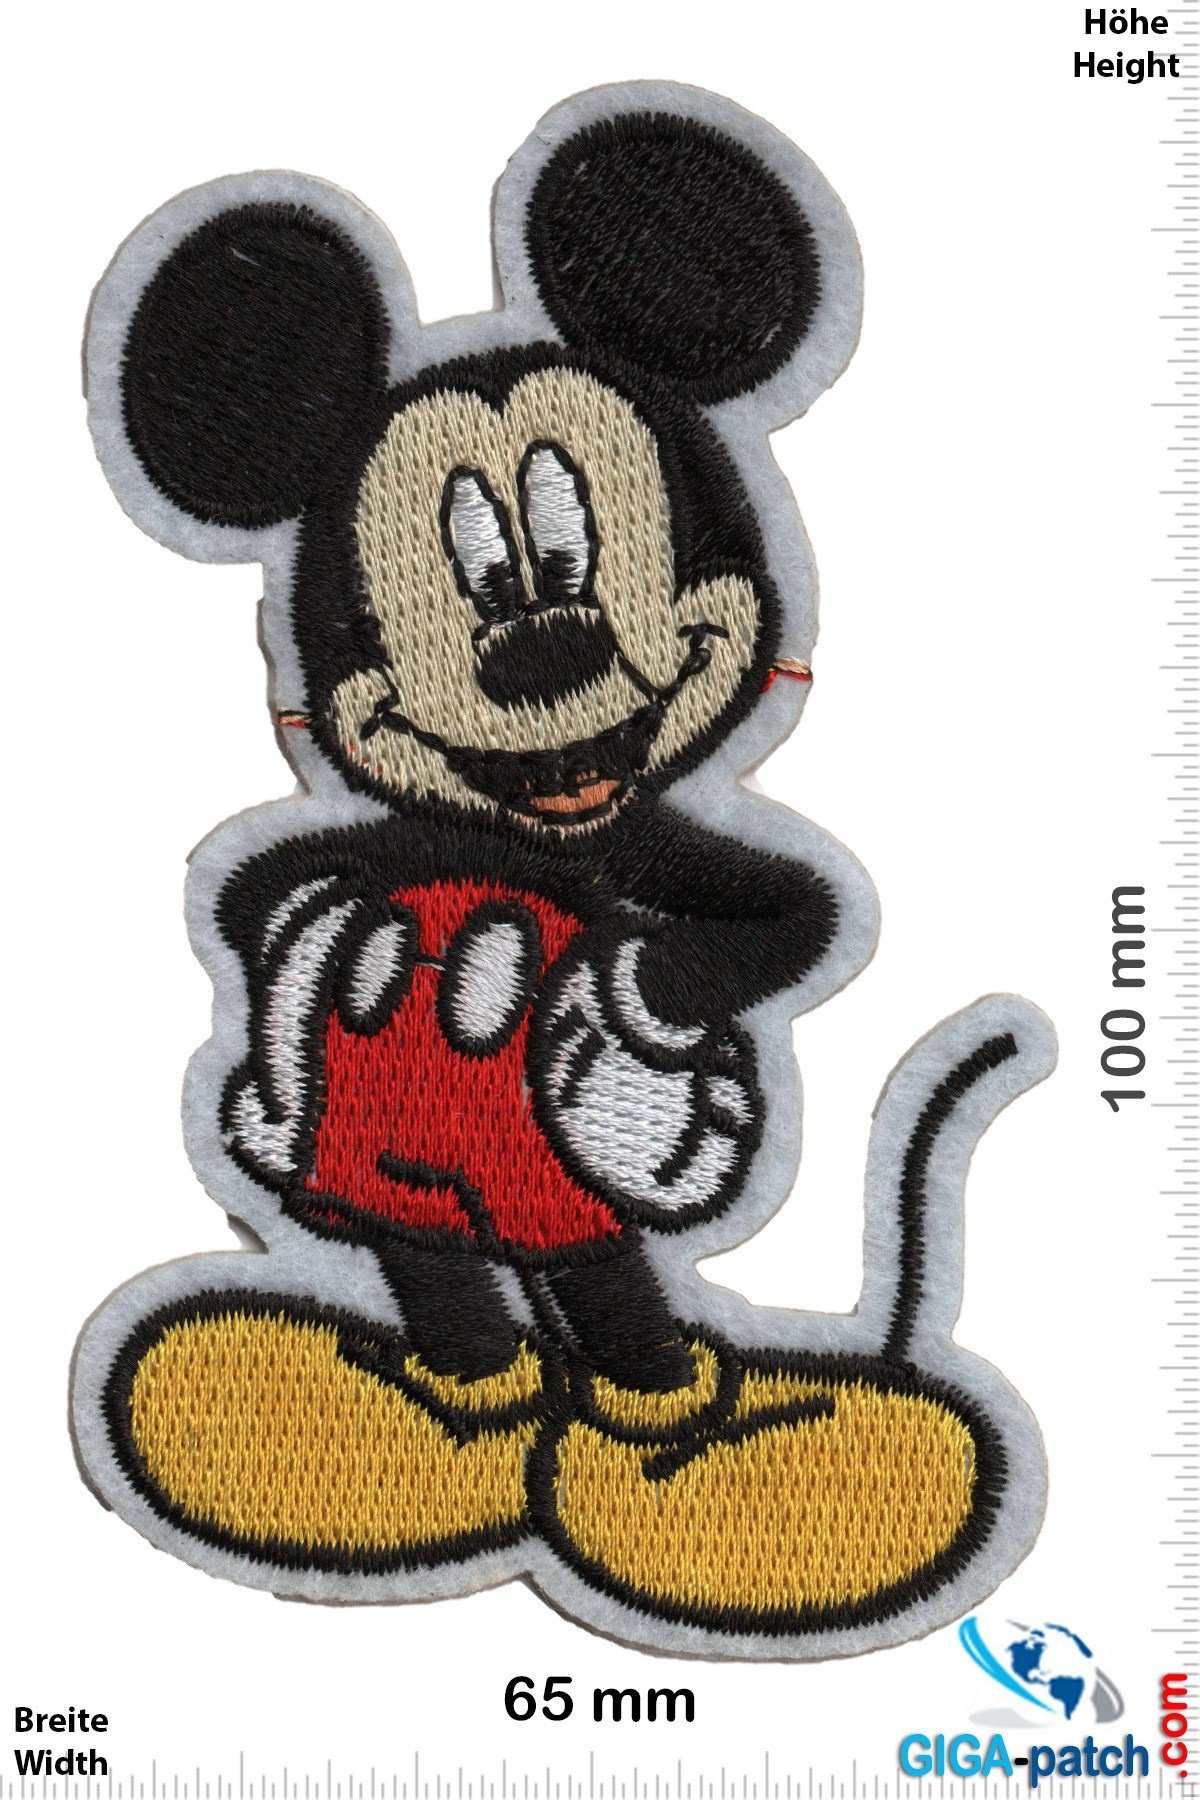 Mickey Manson embroidered patch